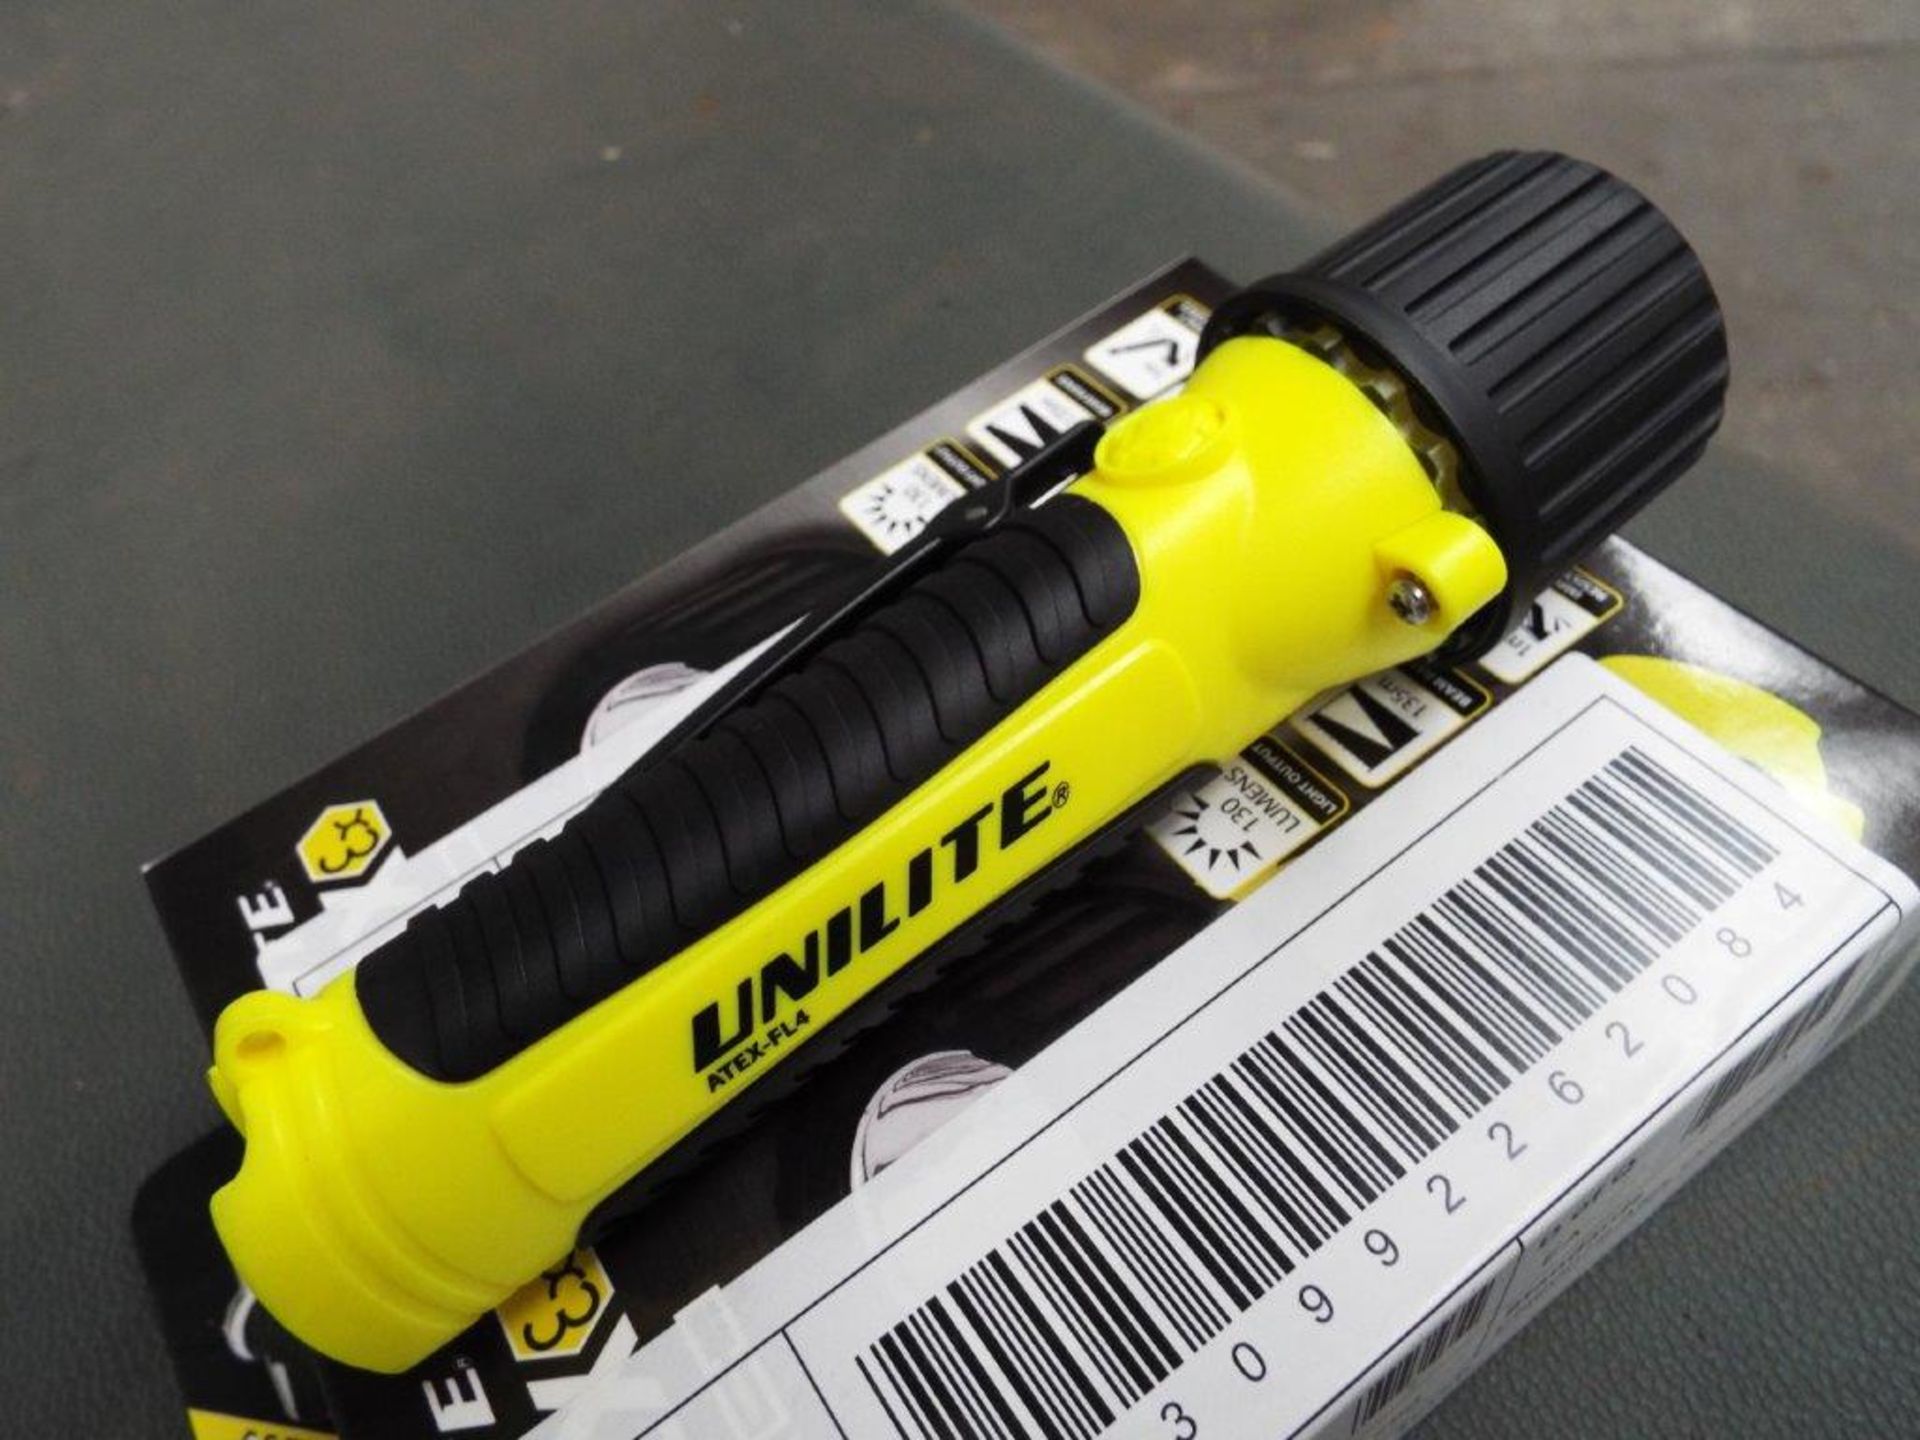 2 x Unilite ATEX-FL4, Waterproof, Shockproof, Intrinsically Safe LED Torches - Image 2 of 9